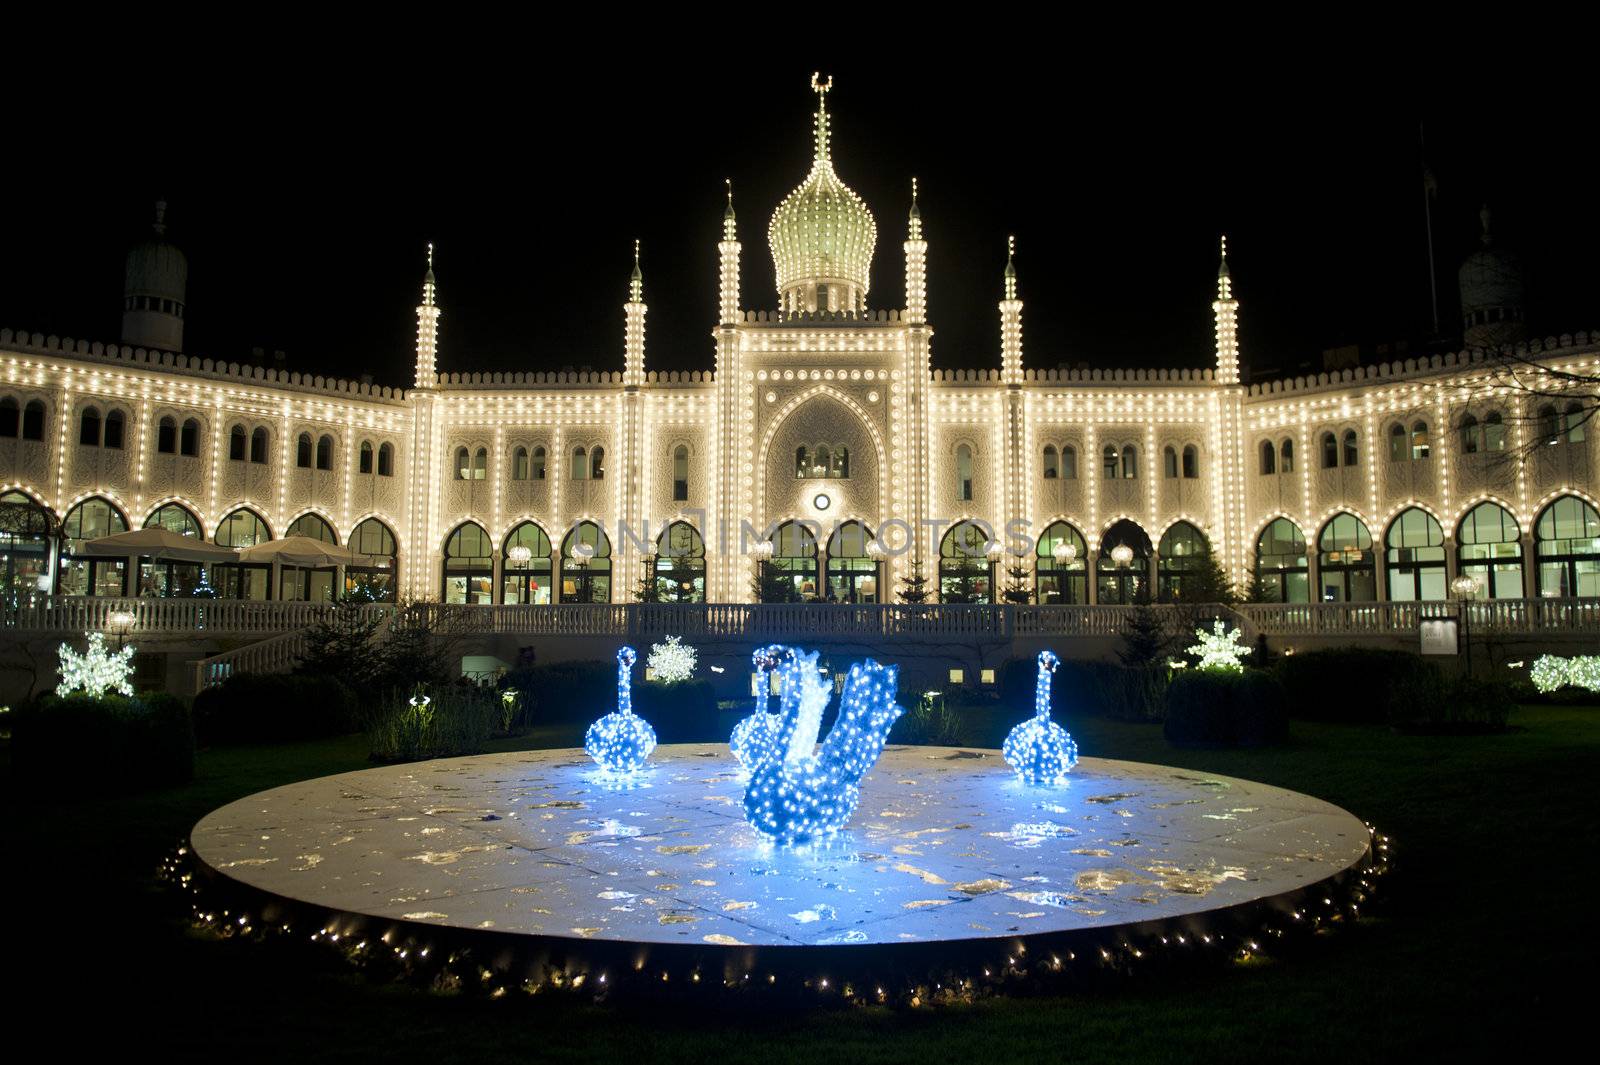 Tivoli is the world's second oldest amusement park and is one of Copenhagen's most famous attractions